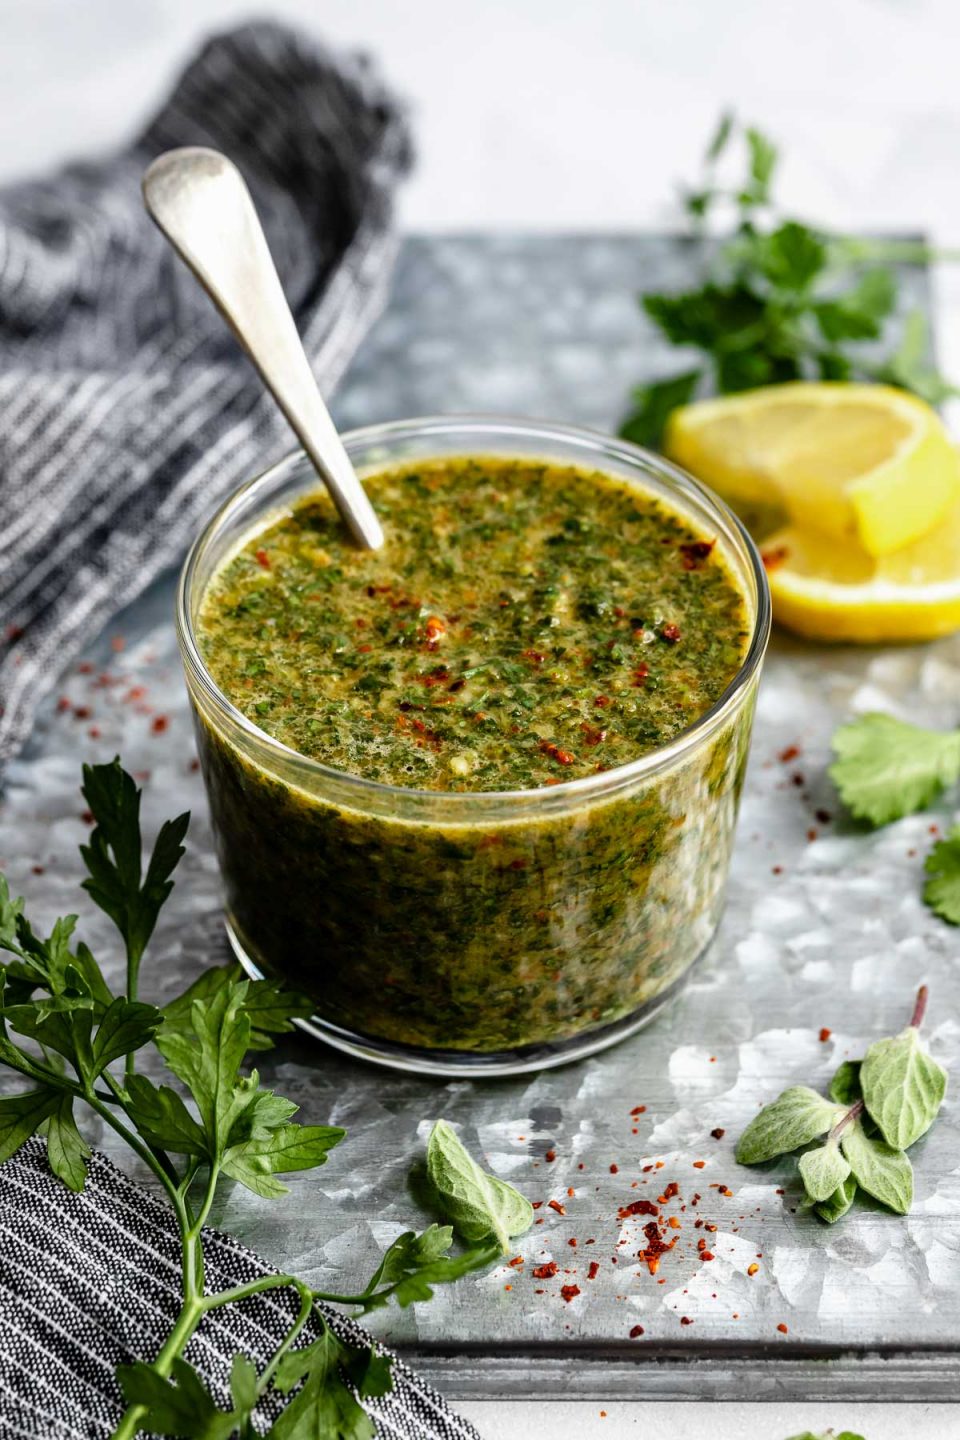 An angled shot of a jar of Chimichurri sauce that sits on a dark gray surface. A spoon has been dipped into the sauce & rests inside the clear glass jar. The jar is surrounded by fresh herbs & a slice of lemon.